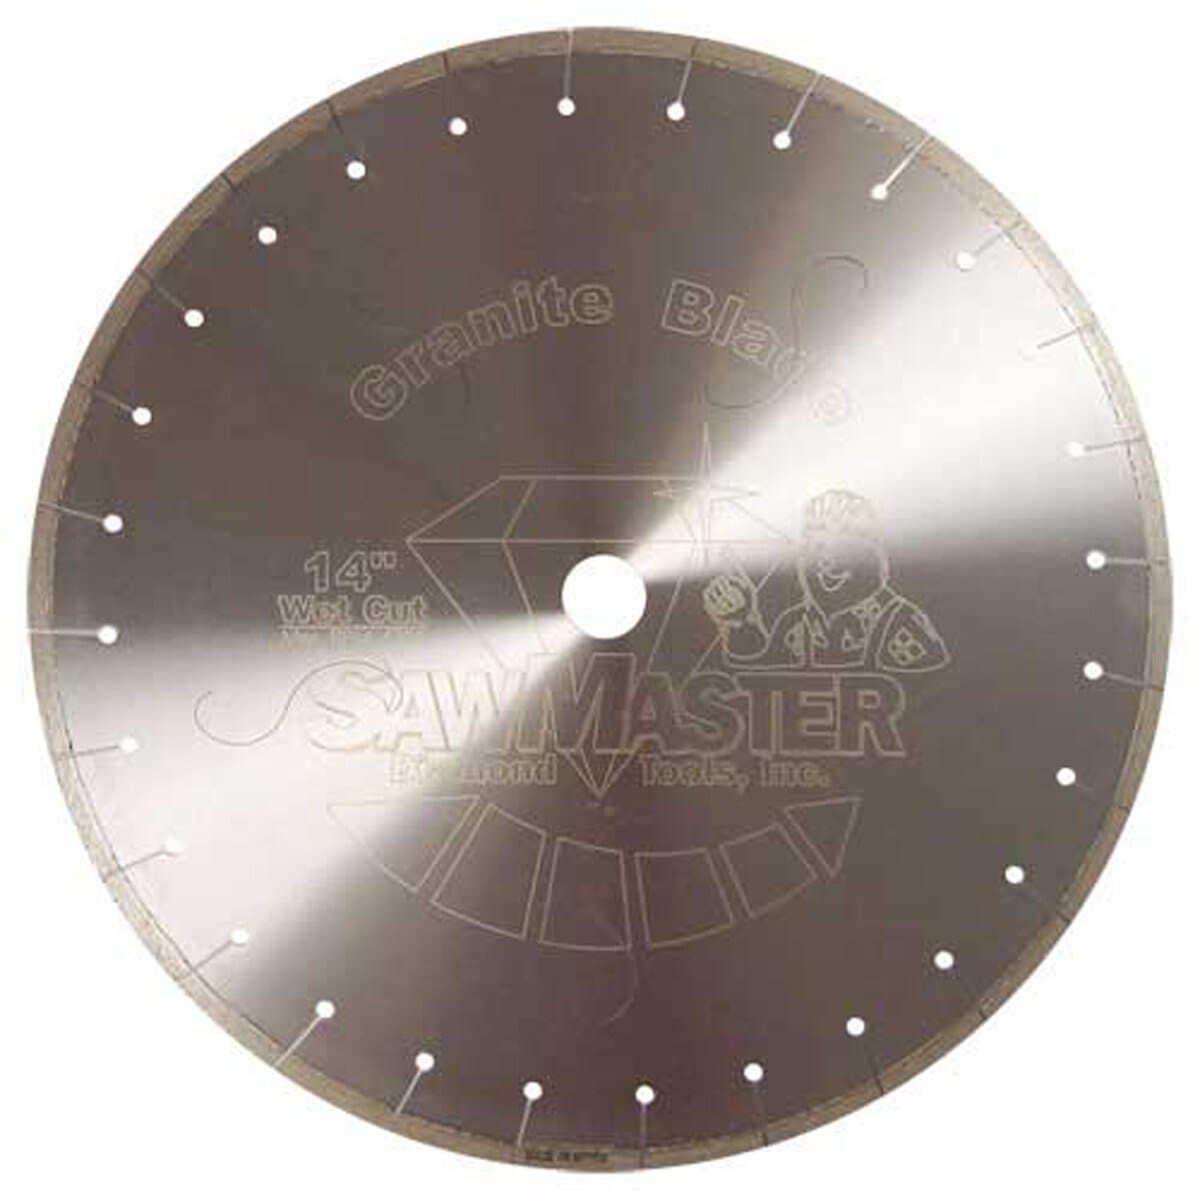 SawMaster Specialty Blades -Wet - SawMaster